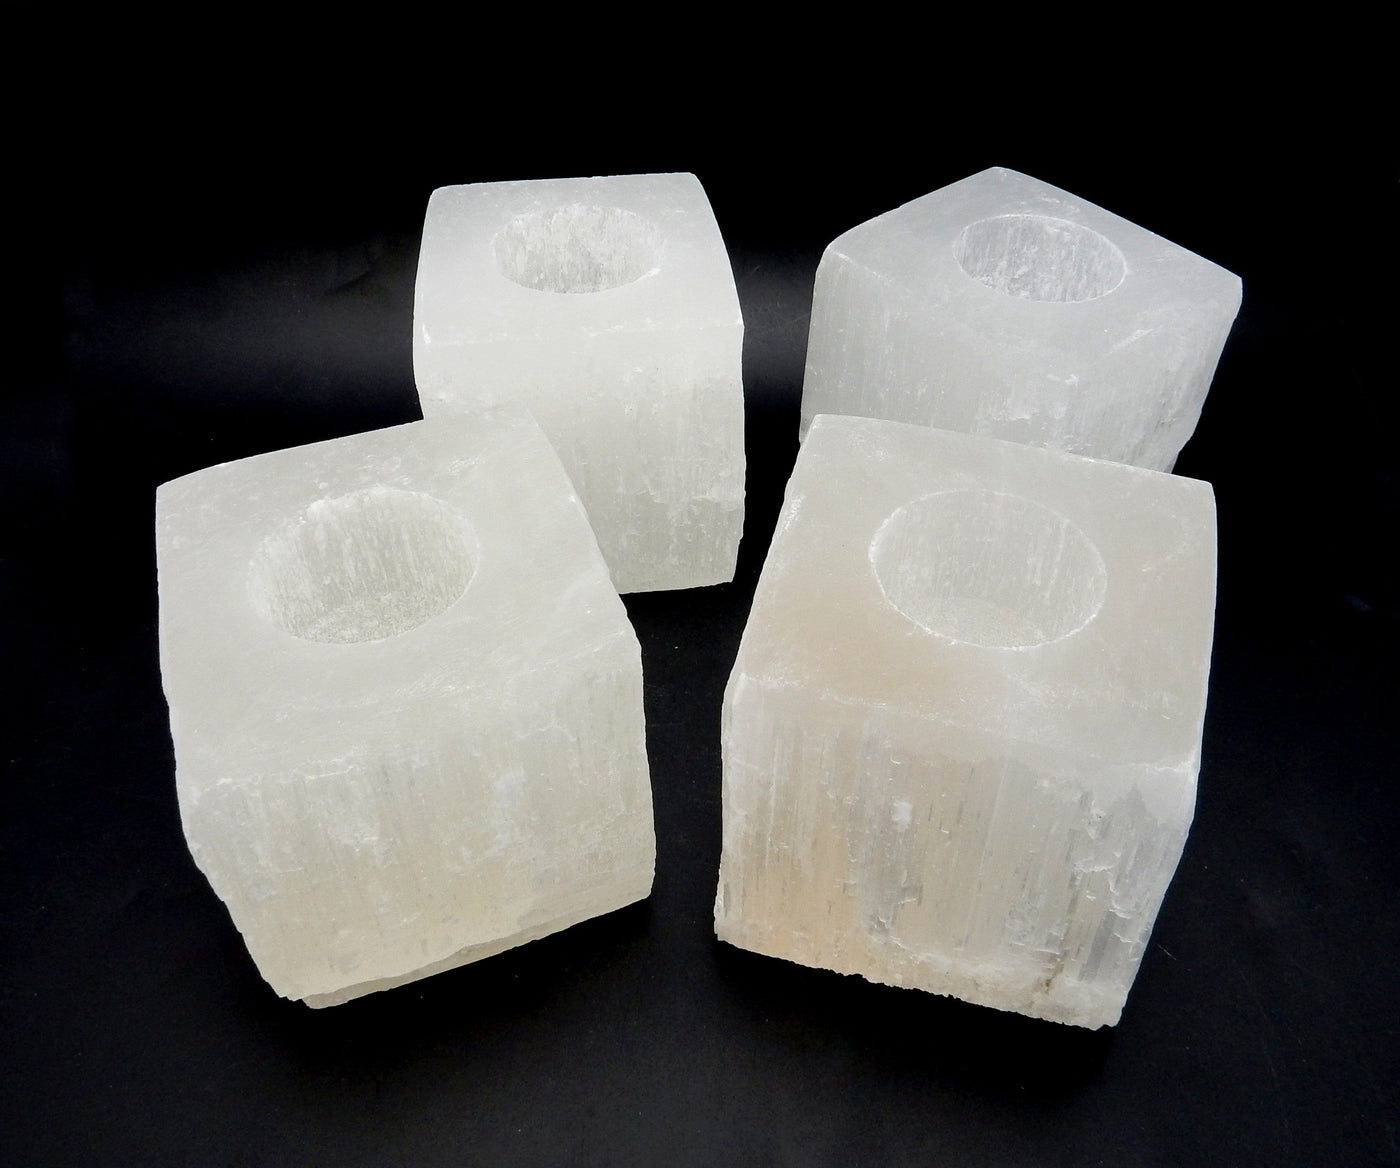 Four Square Shaped Selenite Candle Holder on a black background